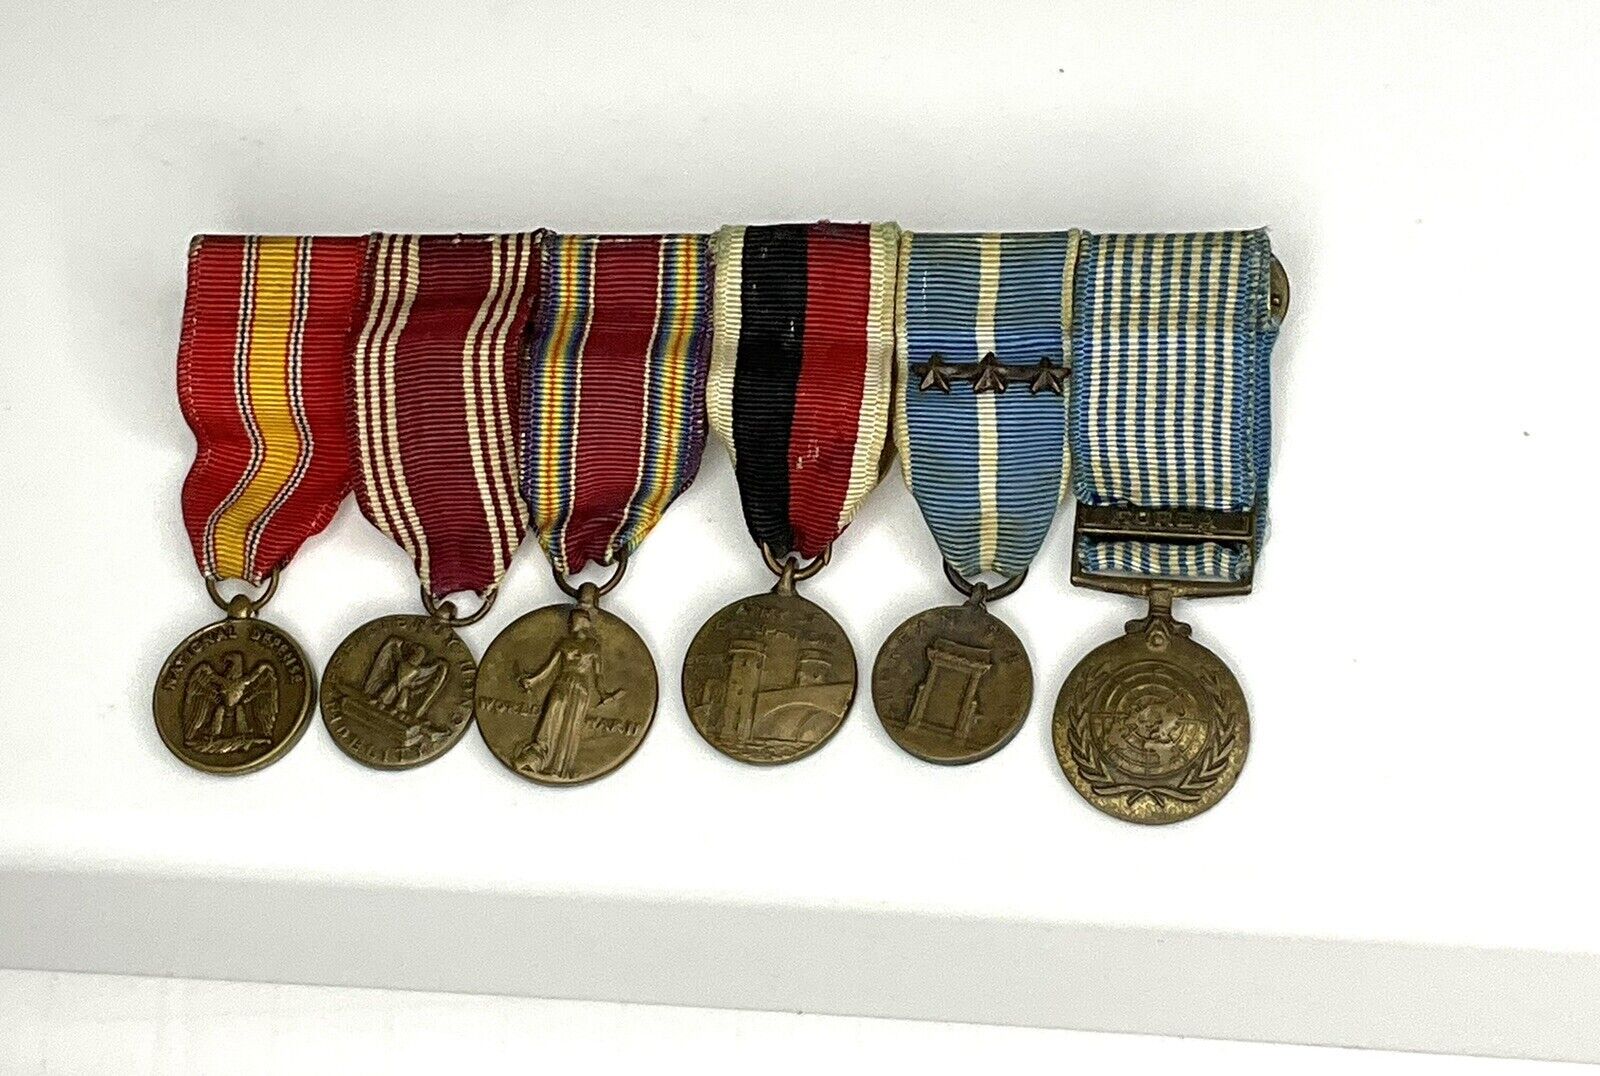 Antique Military Medals WWII and Korea Bar of 5 Medals / Ribbons